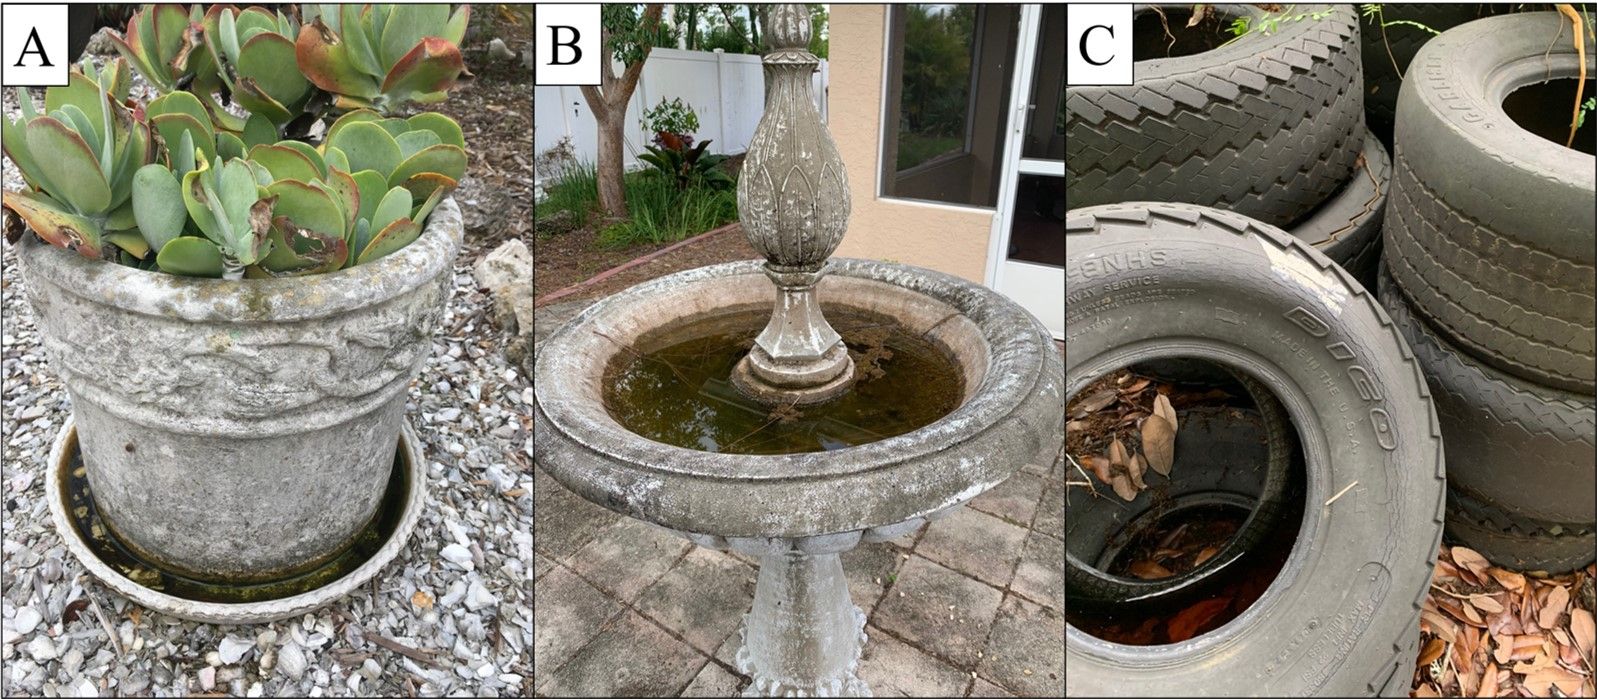 Figure 3. Examples of artificial containers frequently occupied by immature mosquitoes. A. Plant pot saucer; B. Neglected bird bath; C. Discarded tire.